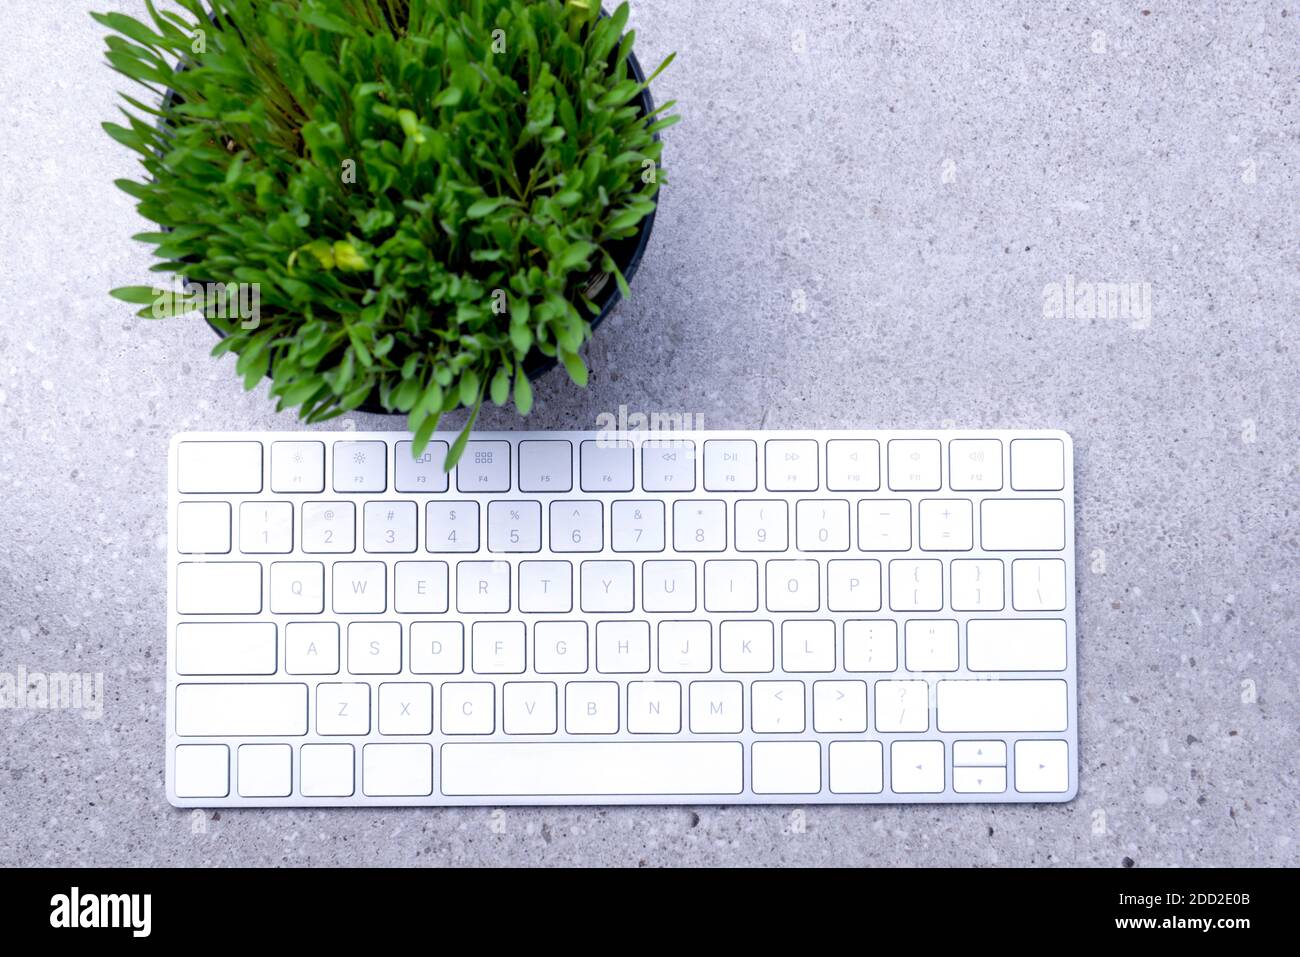 Close up view of millet grass plant in the pot with the keyboard on the desk Stock Photo